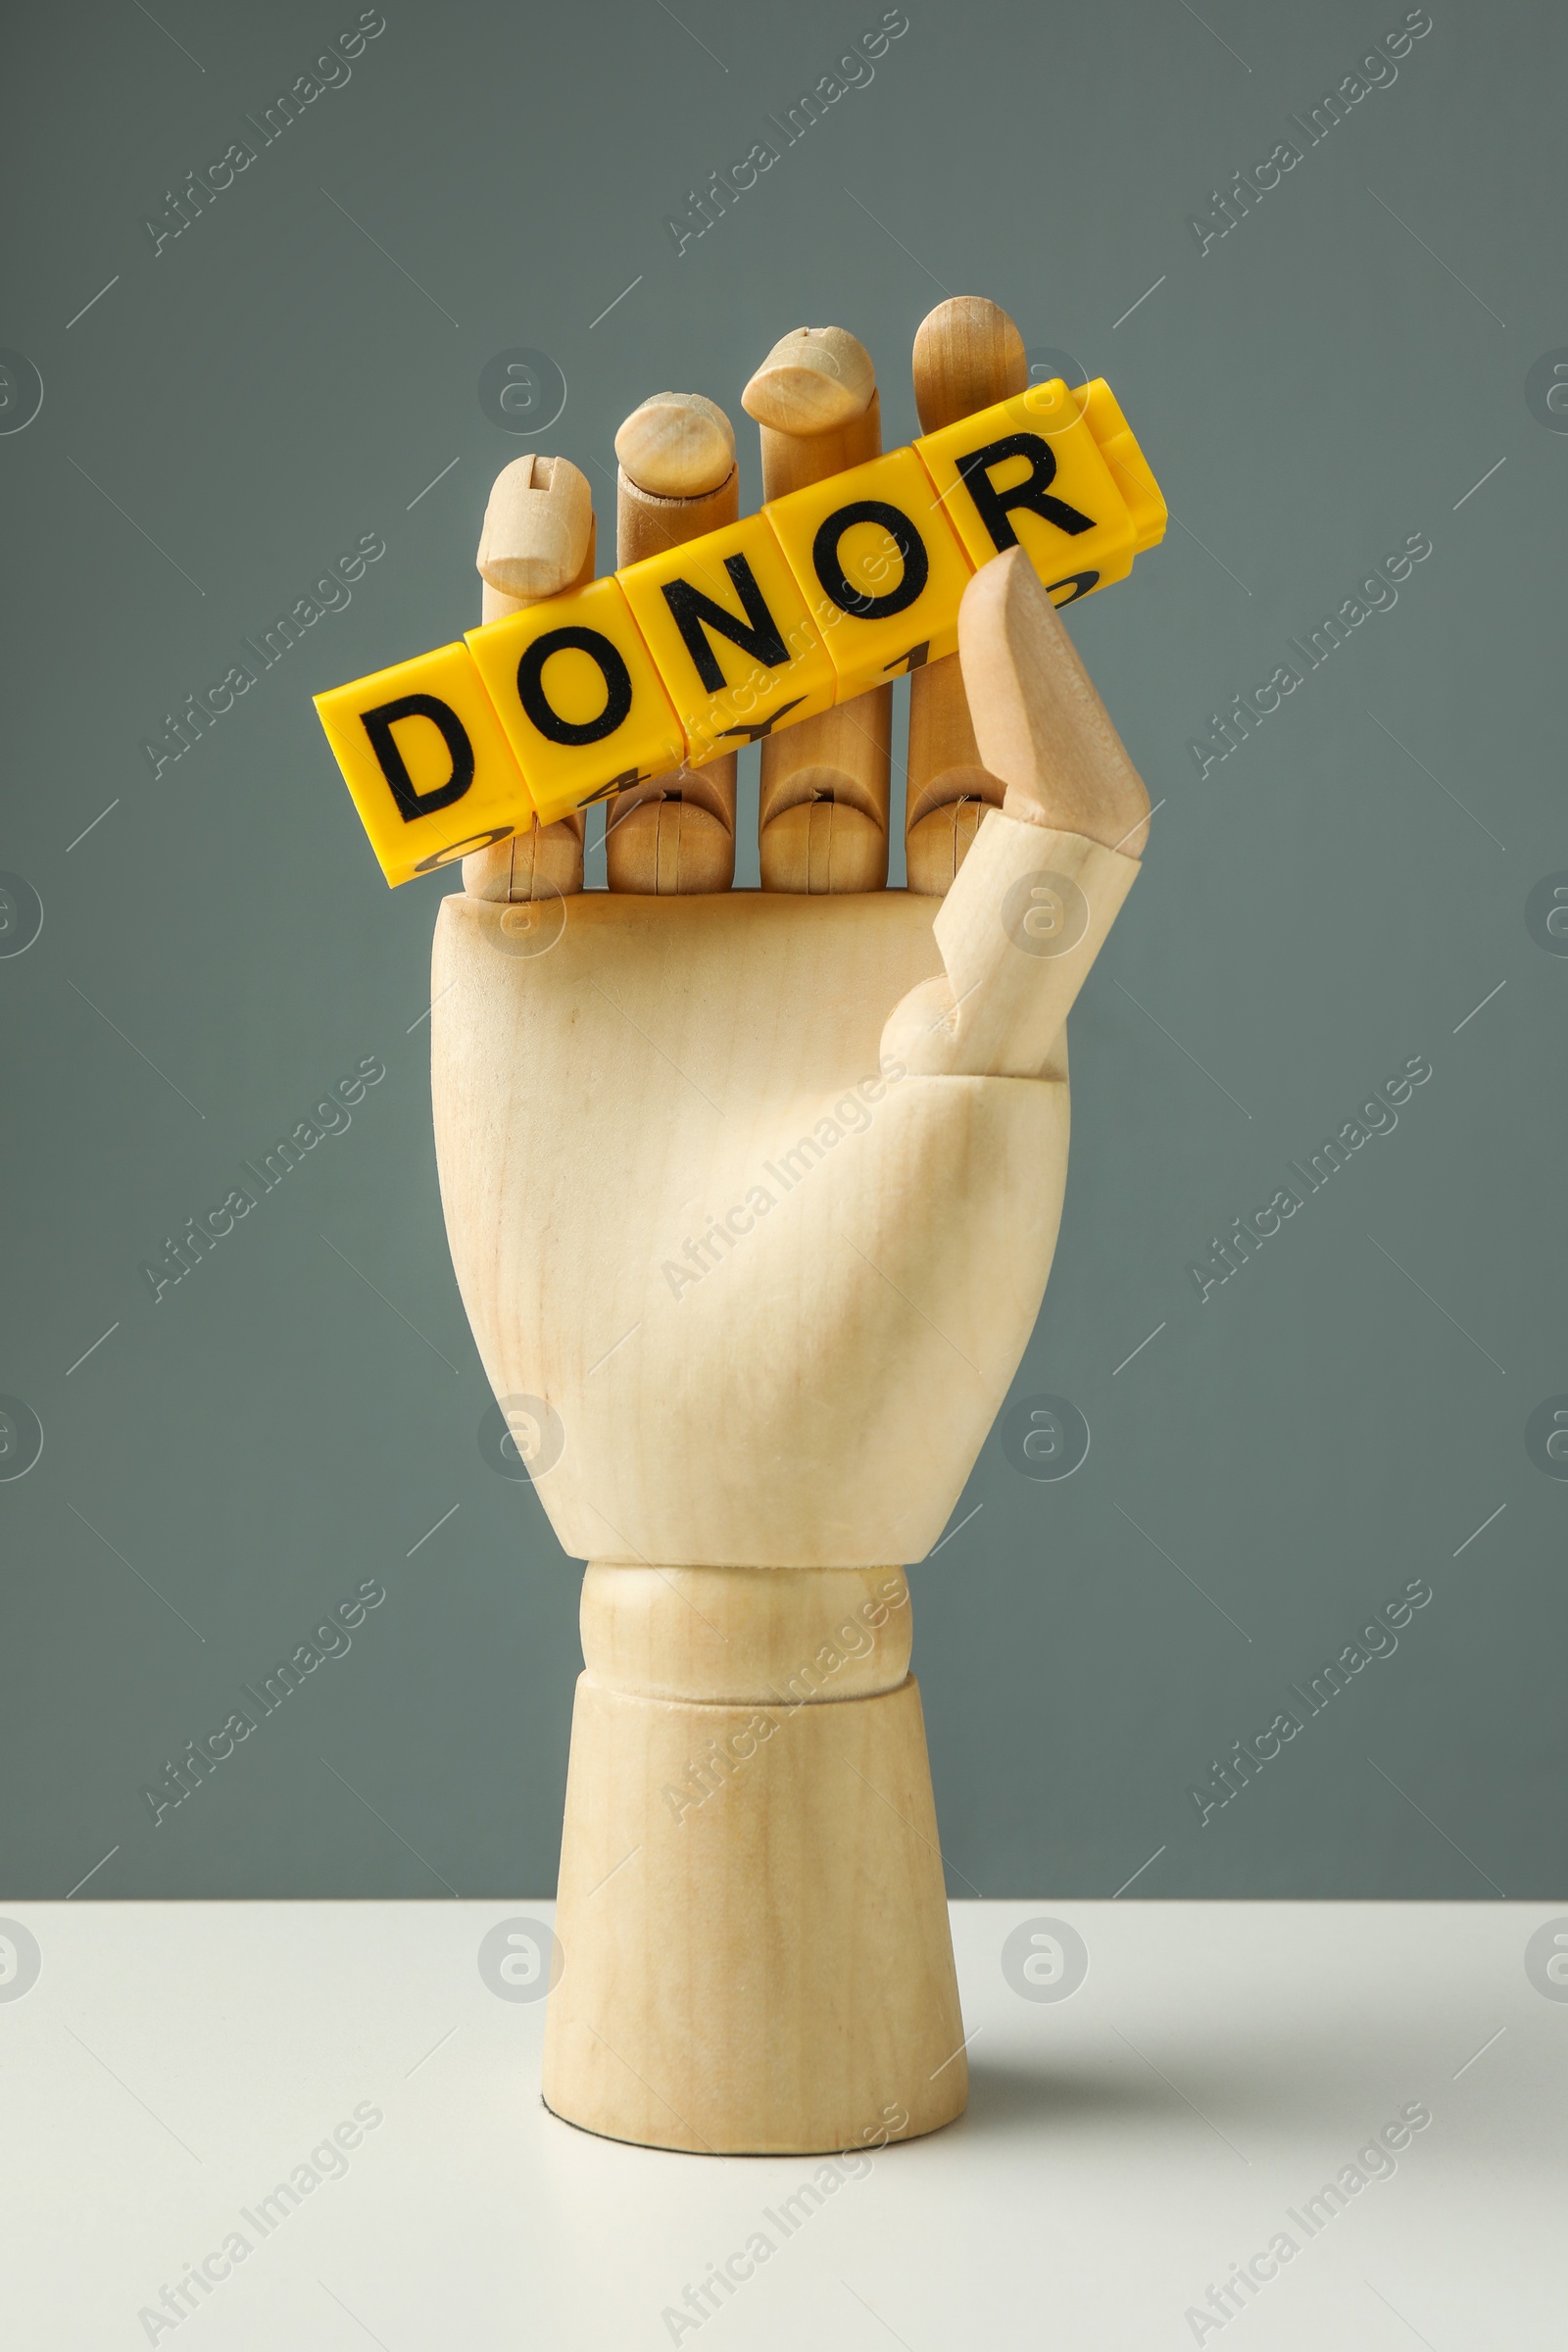 Photo of Mannequin hand holding word Donor made of cubes on white table against grey background